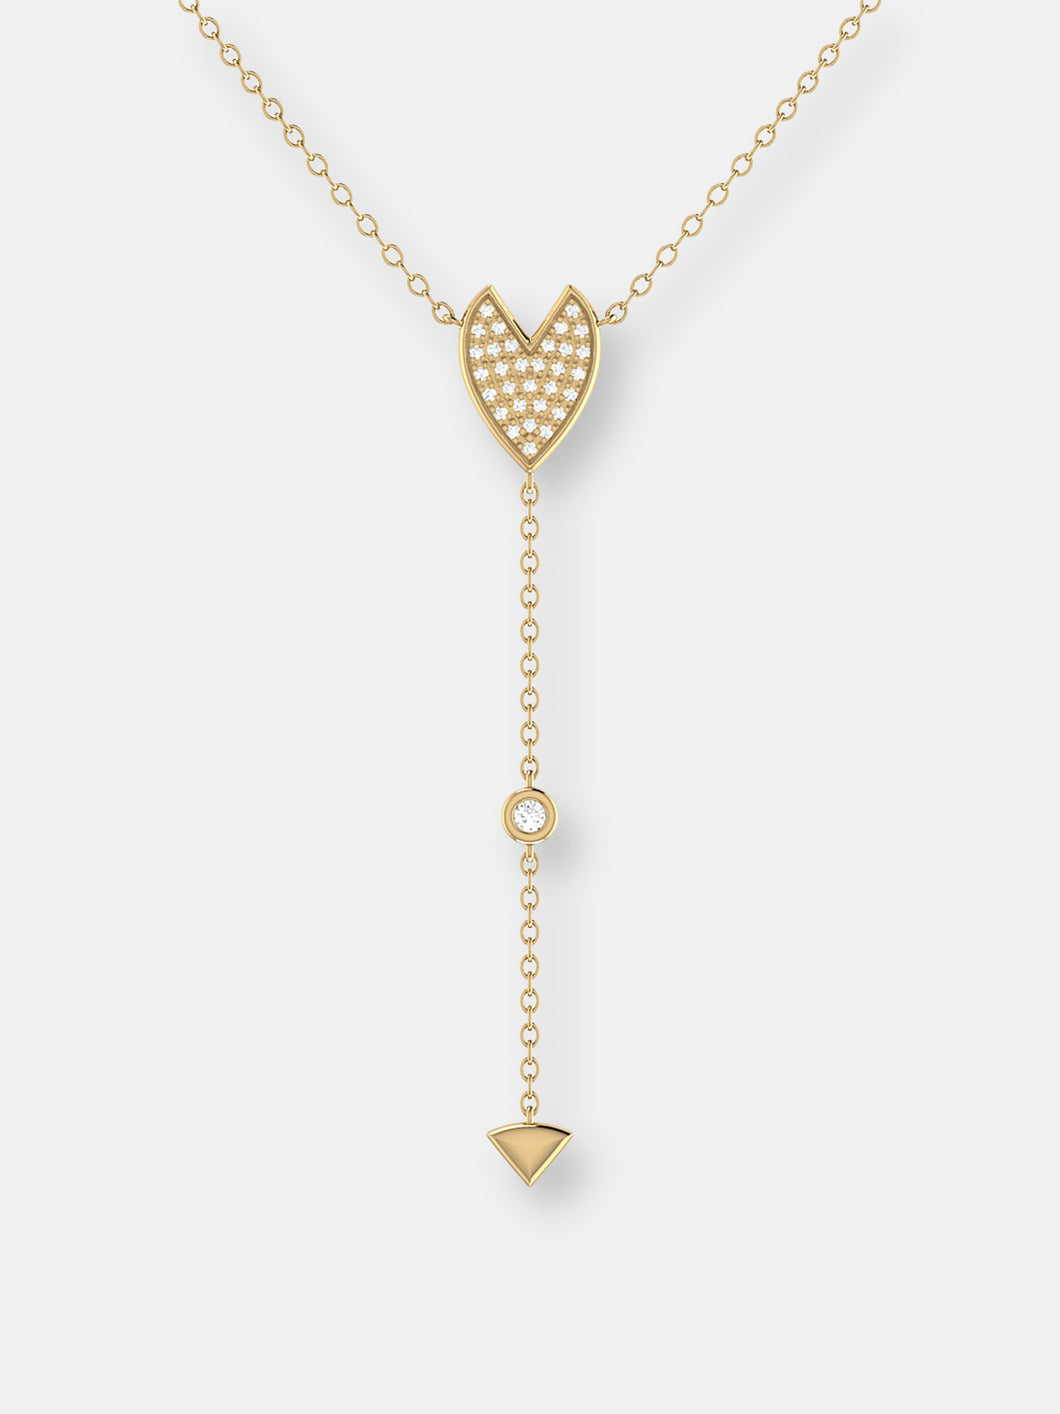 Raindrop Drip Diamond Y Necklace in 14K Yellow Gold Vermeil on Sterling Silver